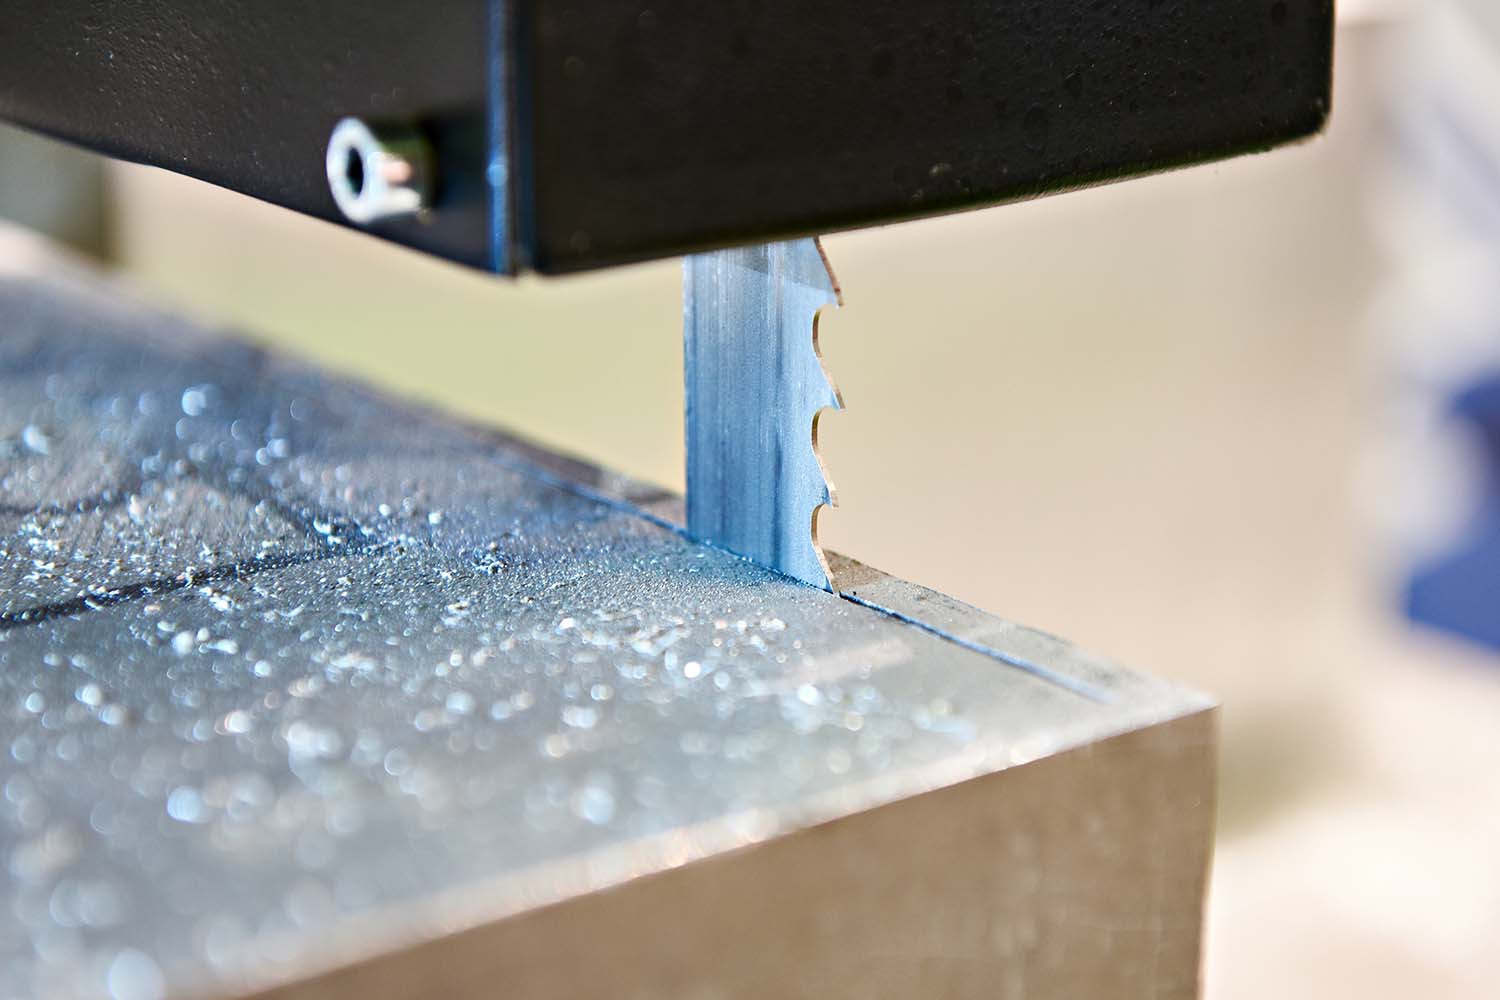 Sawing is frequently  overlooked as an important part  of the machining  process.